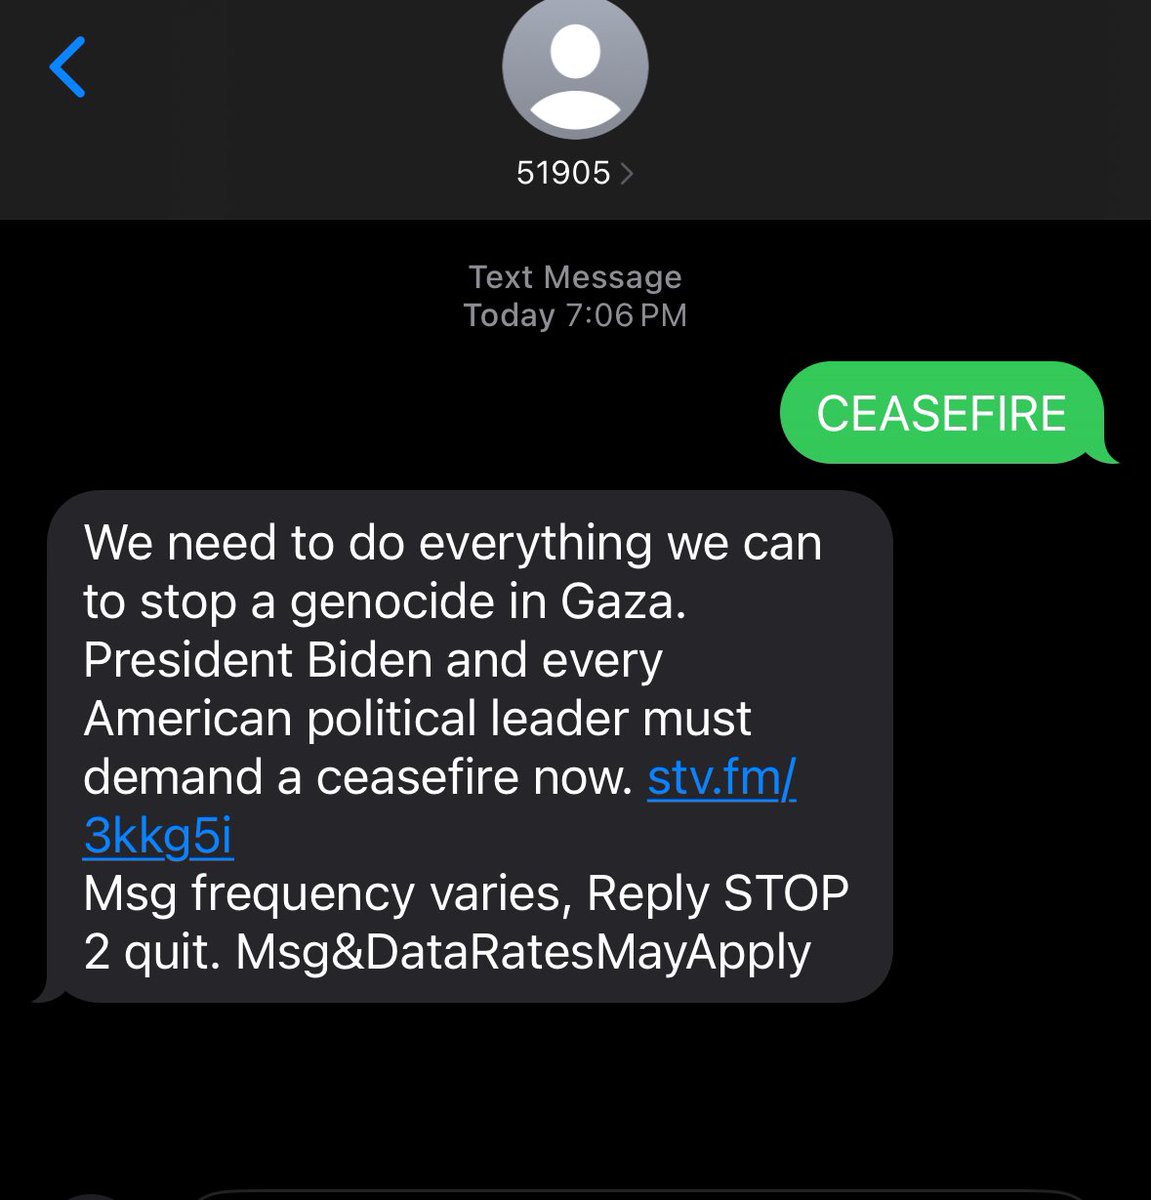 If you’re in the U.S text the number 51905 with the word CEASEFIRE. This will automatically send a pre-drafted letter to representatives and leaders urging for a ceasefire.